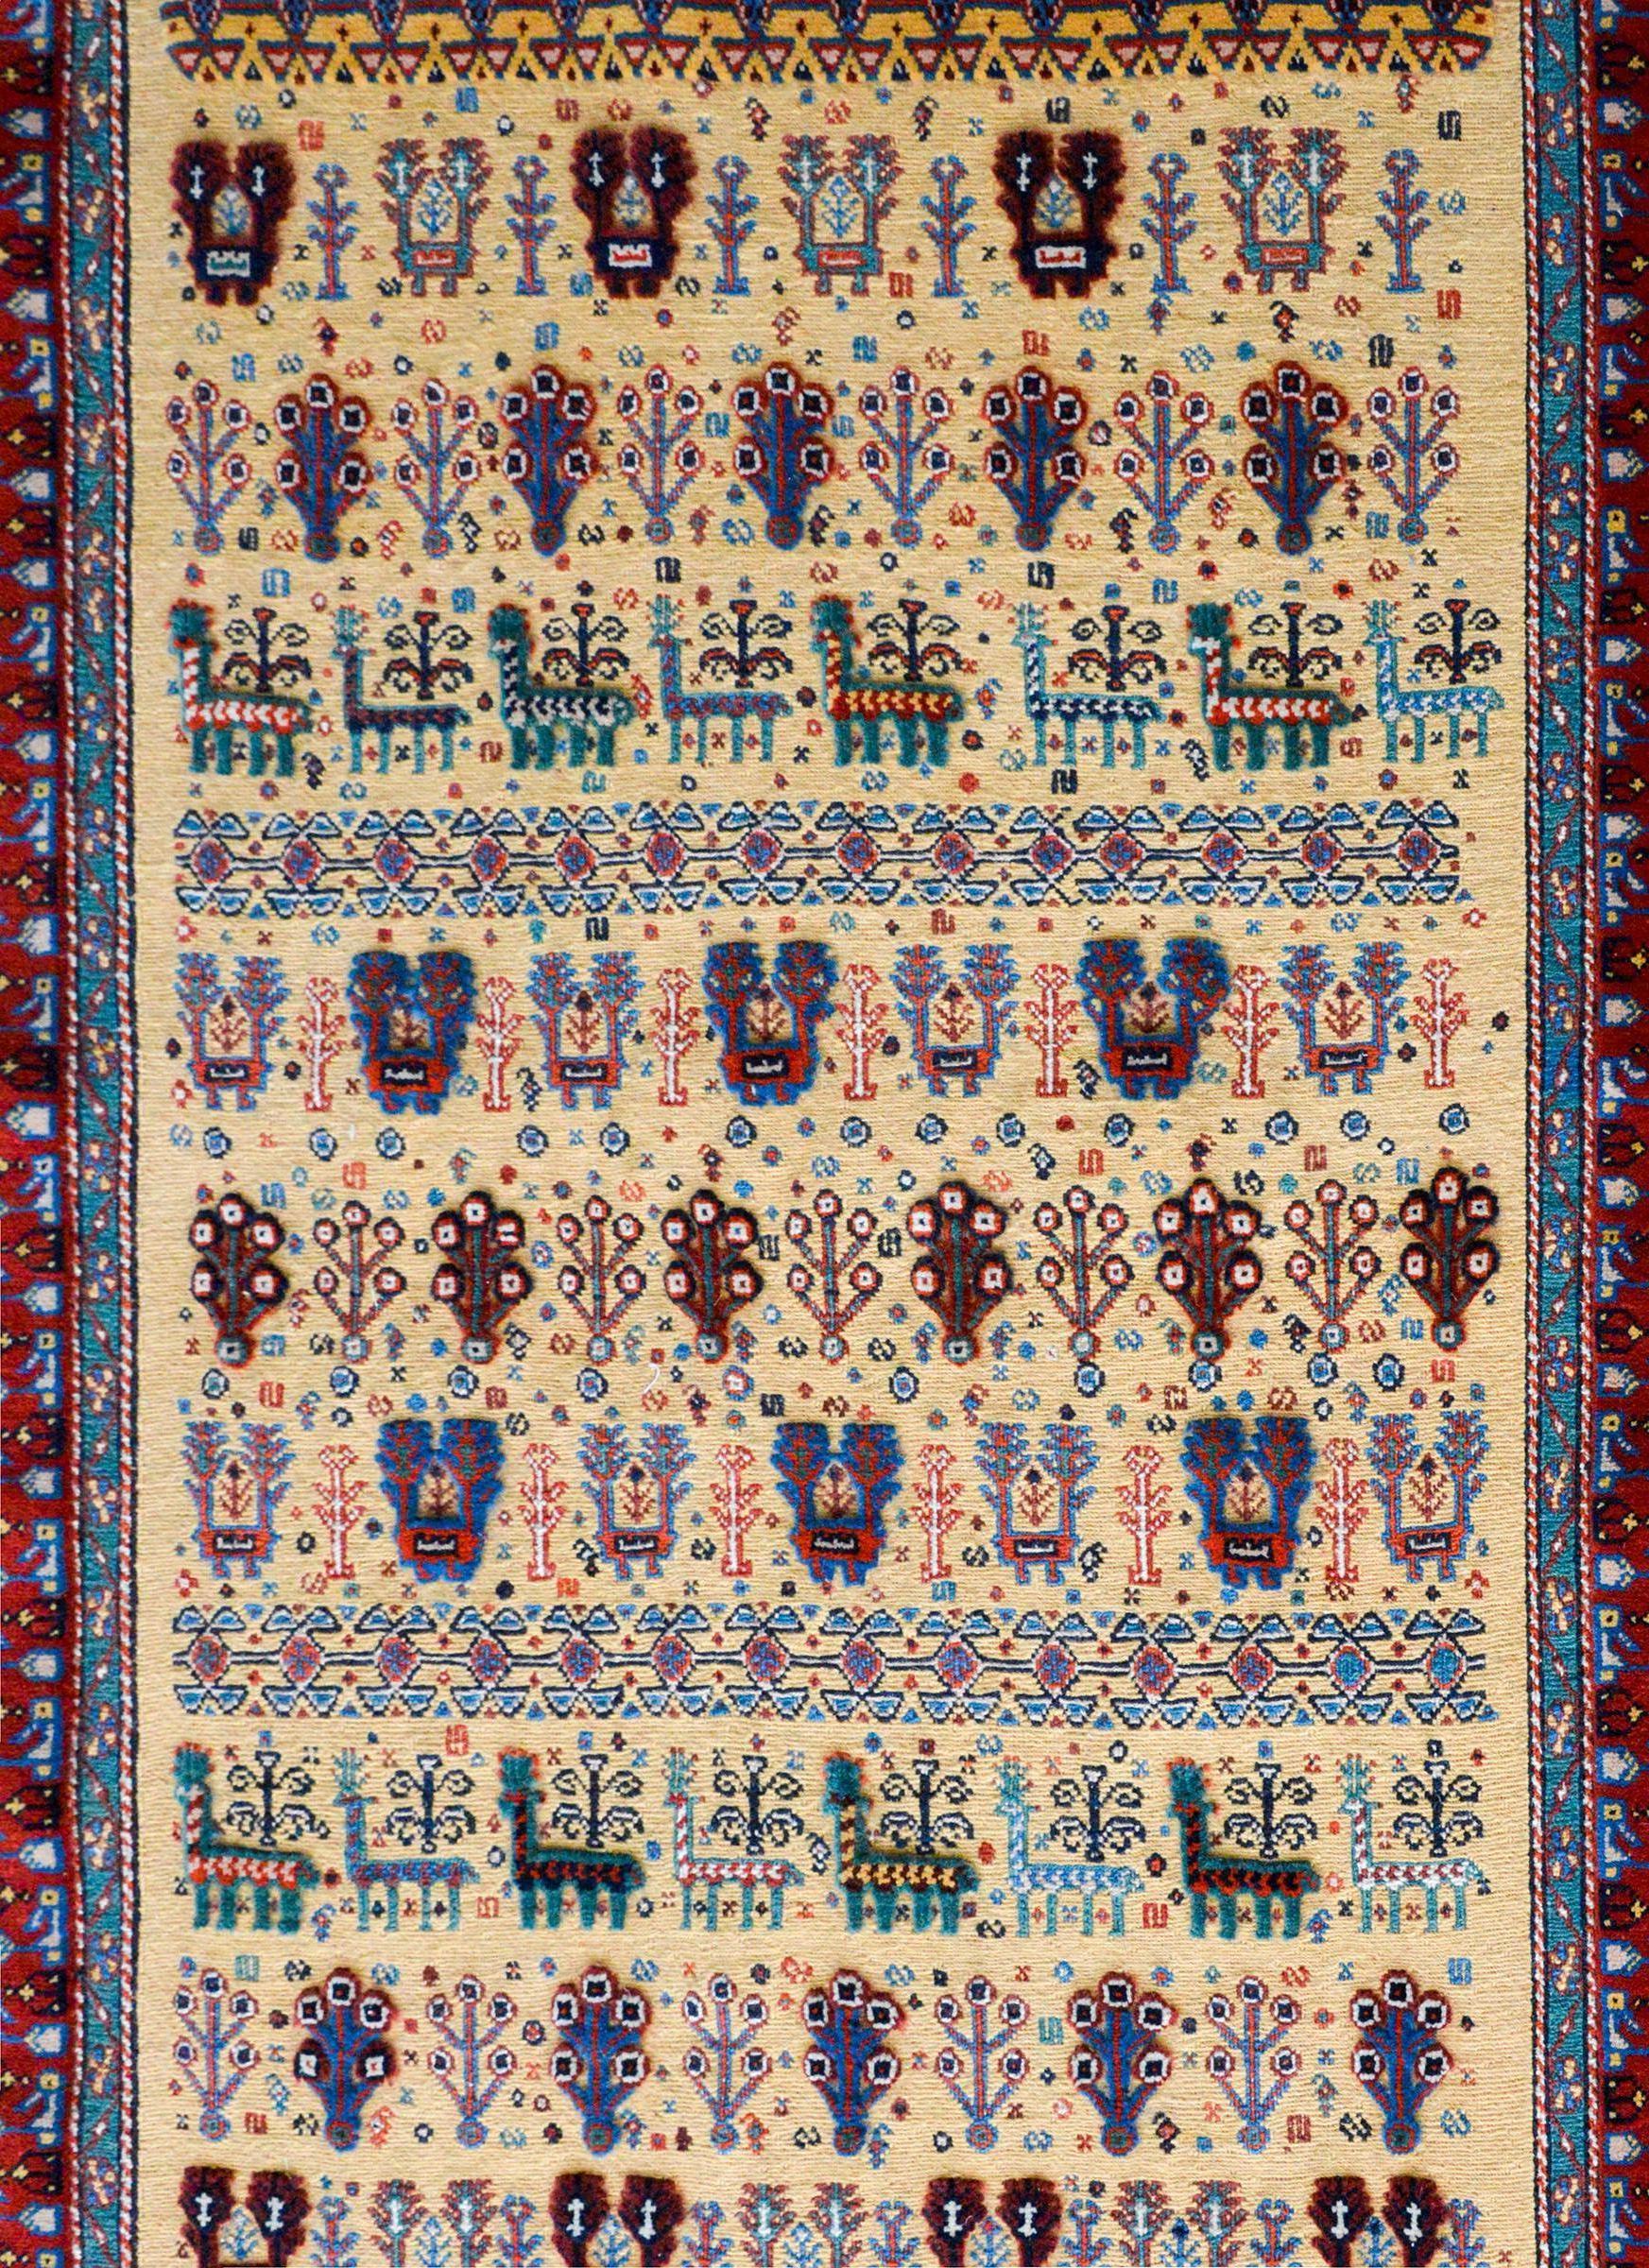 An incredible vintage late 20th-century Afshar rug with a pattern with alternating trees-of-life, deer, and stylized floral patterns all woven in cut pile set against a yellow flat weave background. The border is striking with several stylized